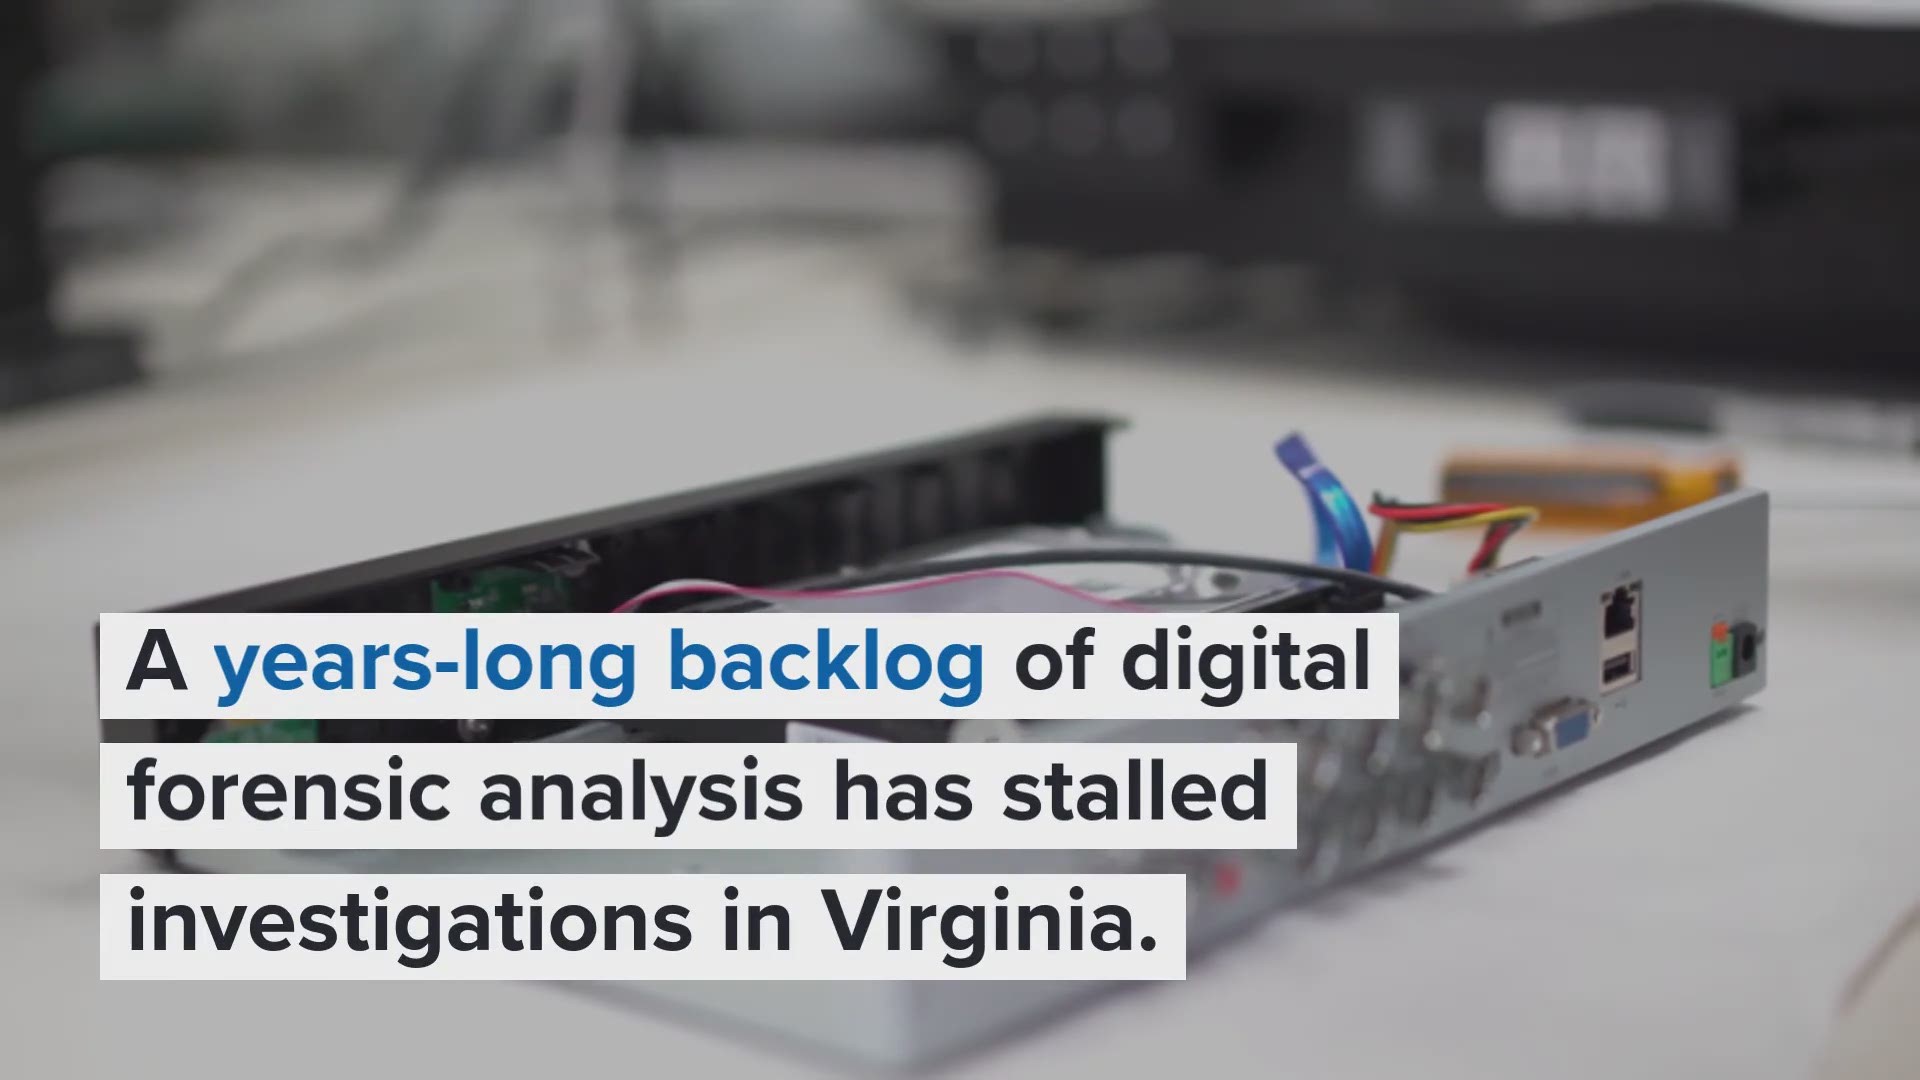 A WUSA9 Investigation has uncovered Virginia has a years-long backlog of digital devices waiting to be analyzed for criminal investigations that may be delaying just